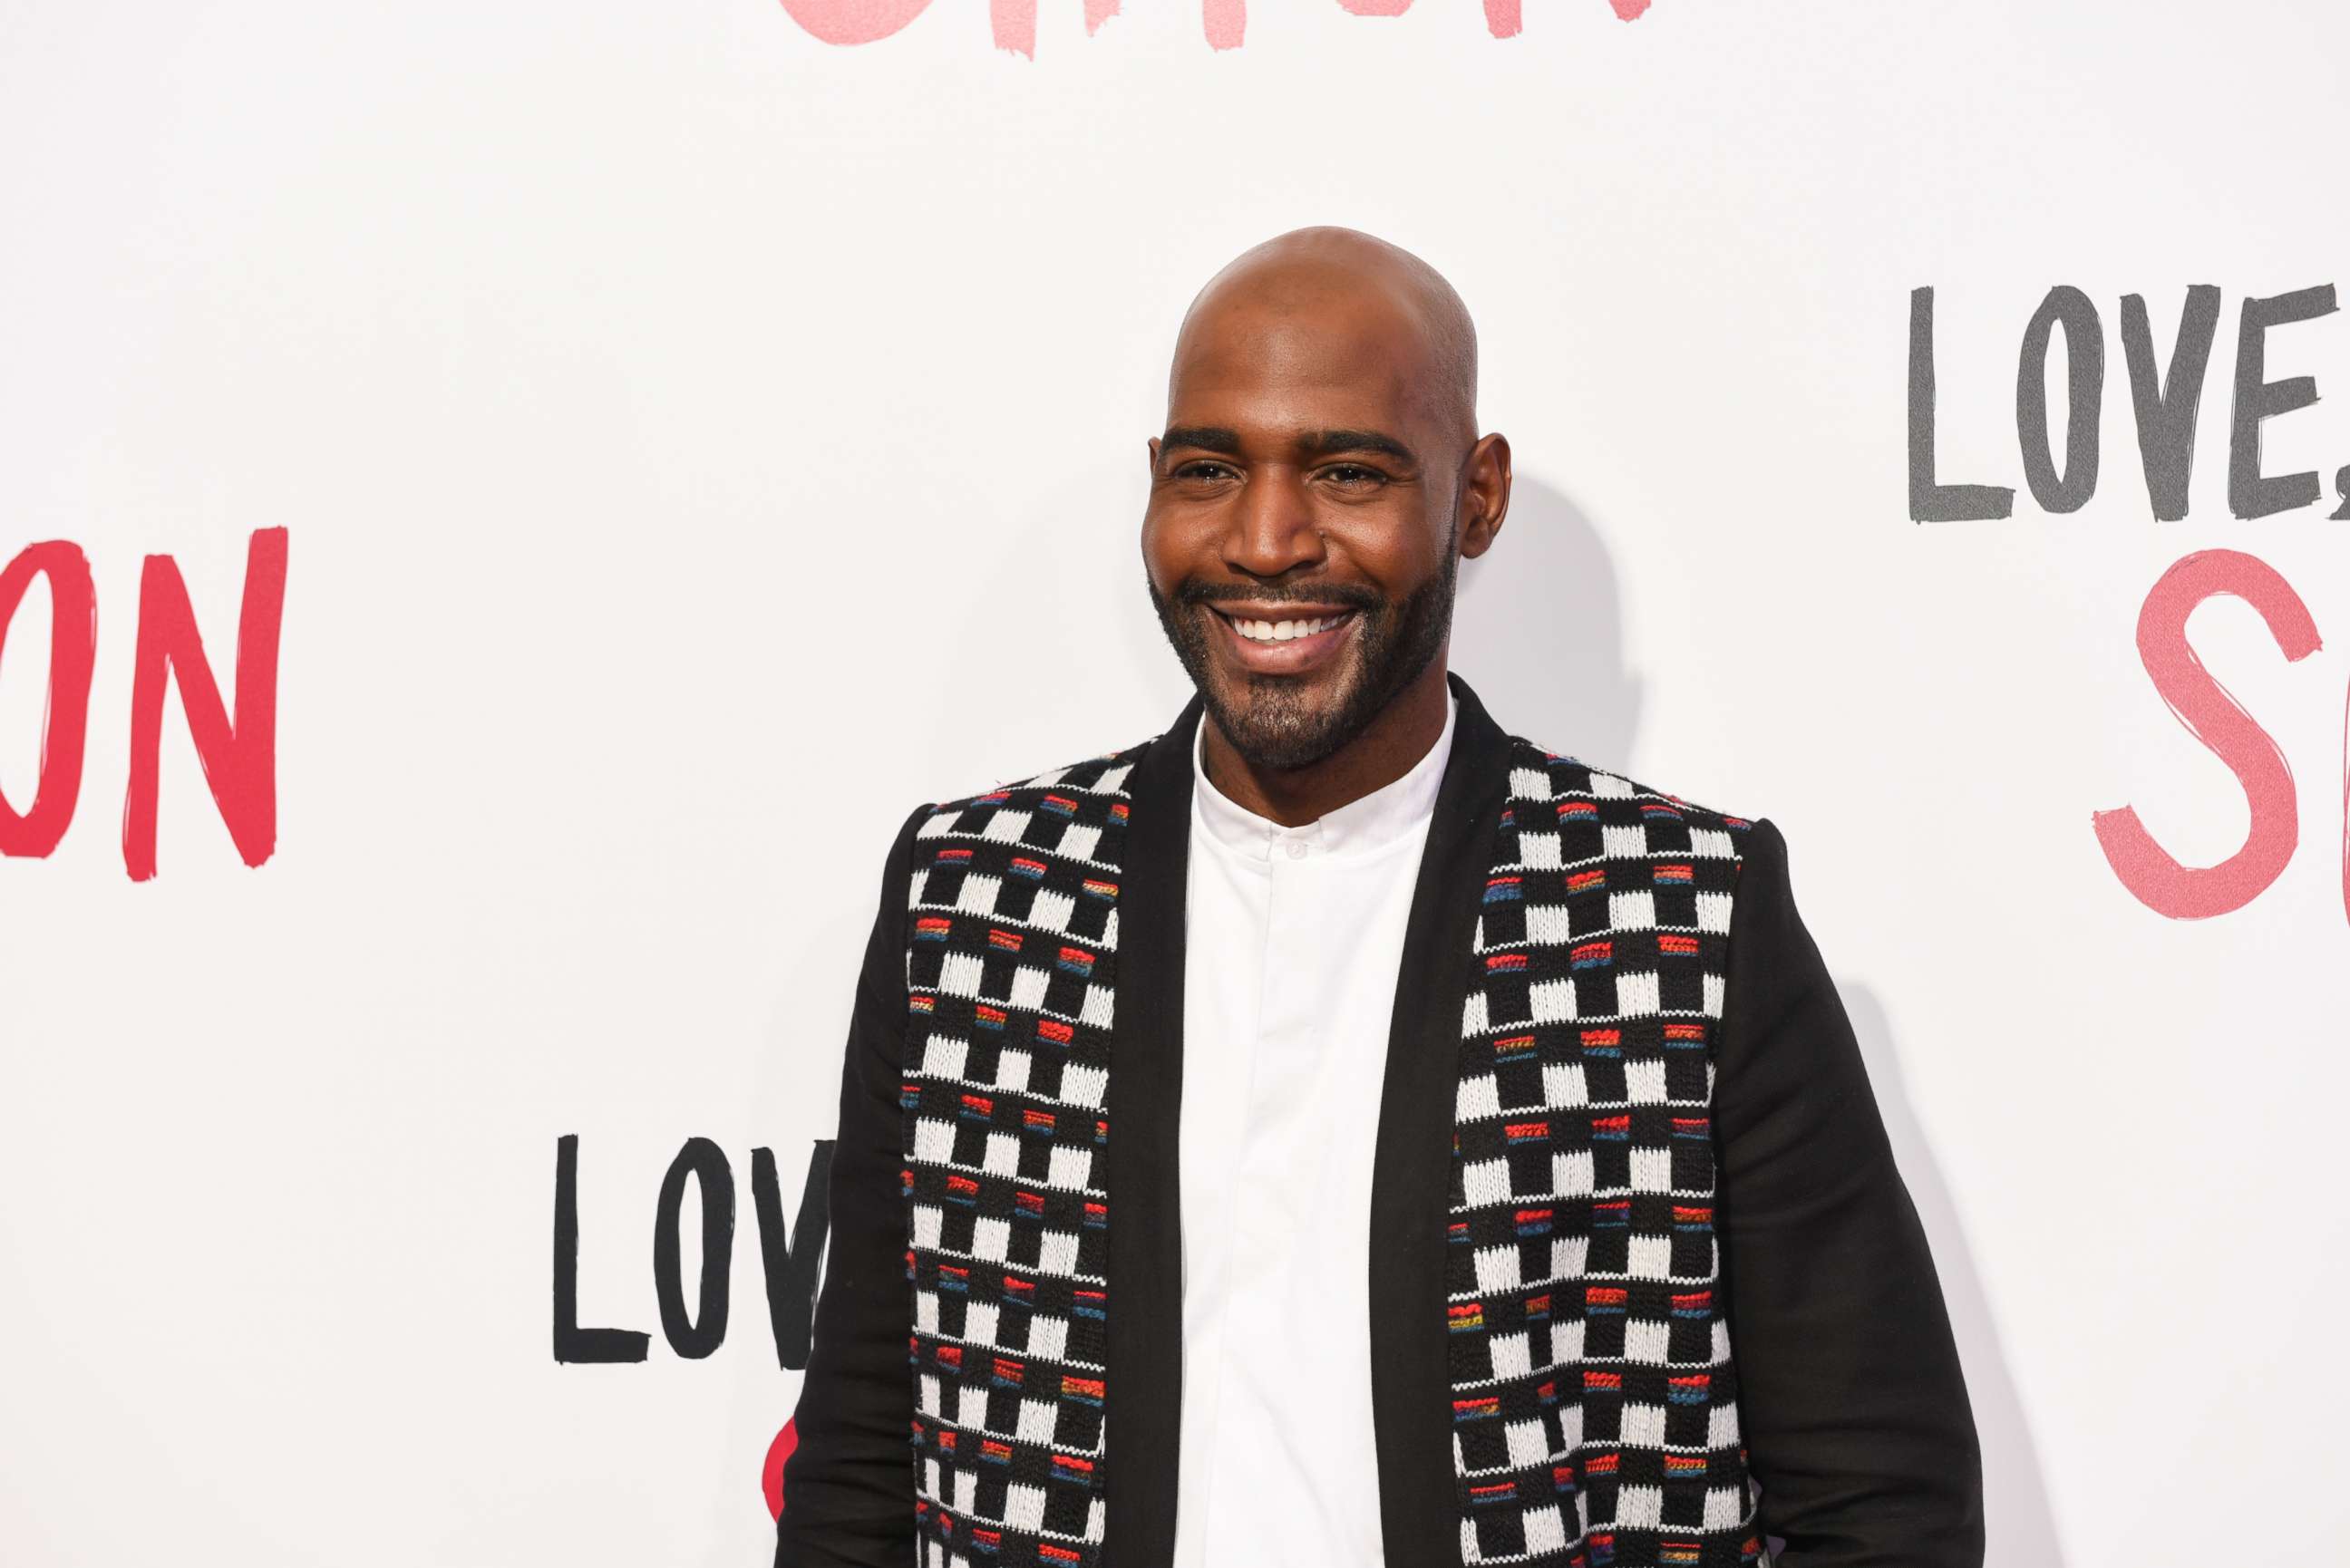 PHOTO: Karamo Brown attends Special Screening Of 20th Century Fox's "Love, Simon" - Arrivals at Westfield Century City, March 13, 2018, in Century City, Calif.